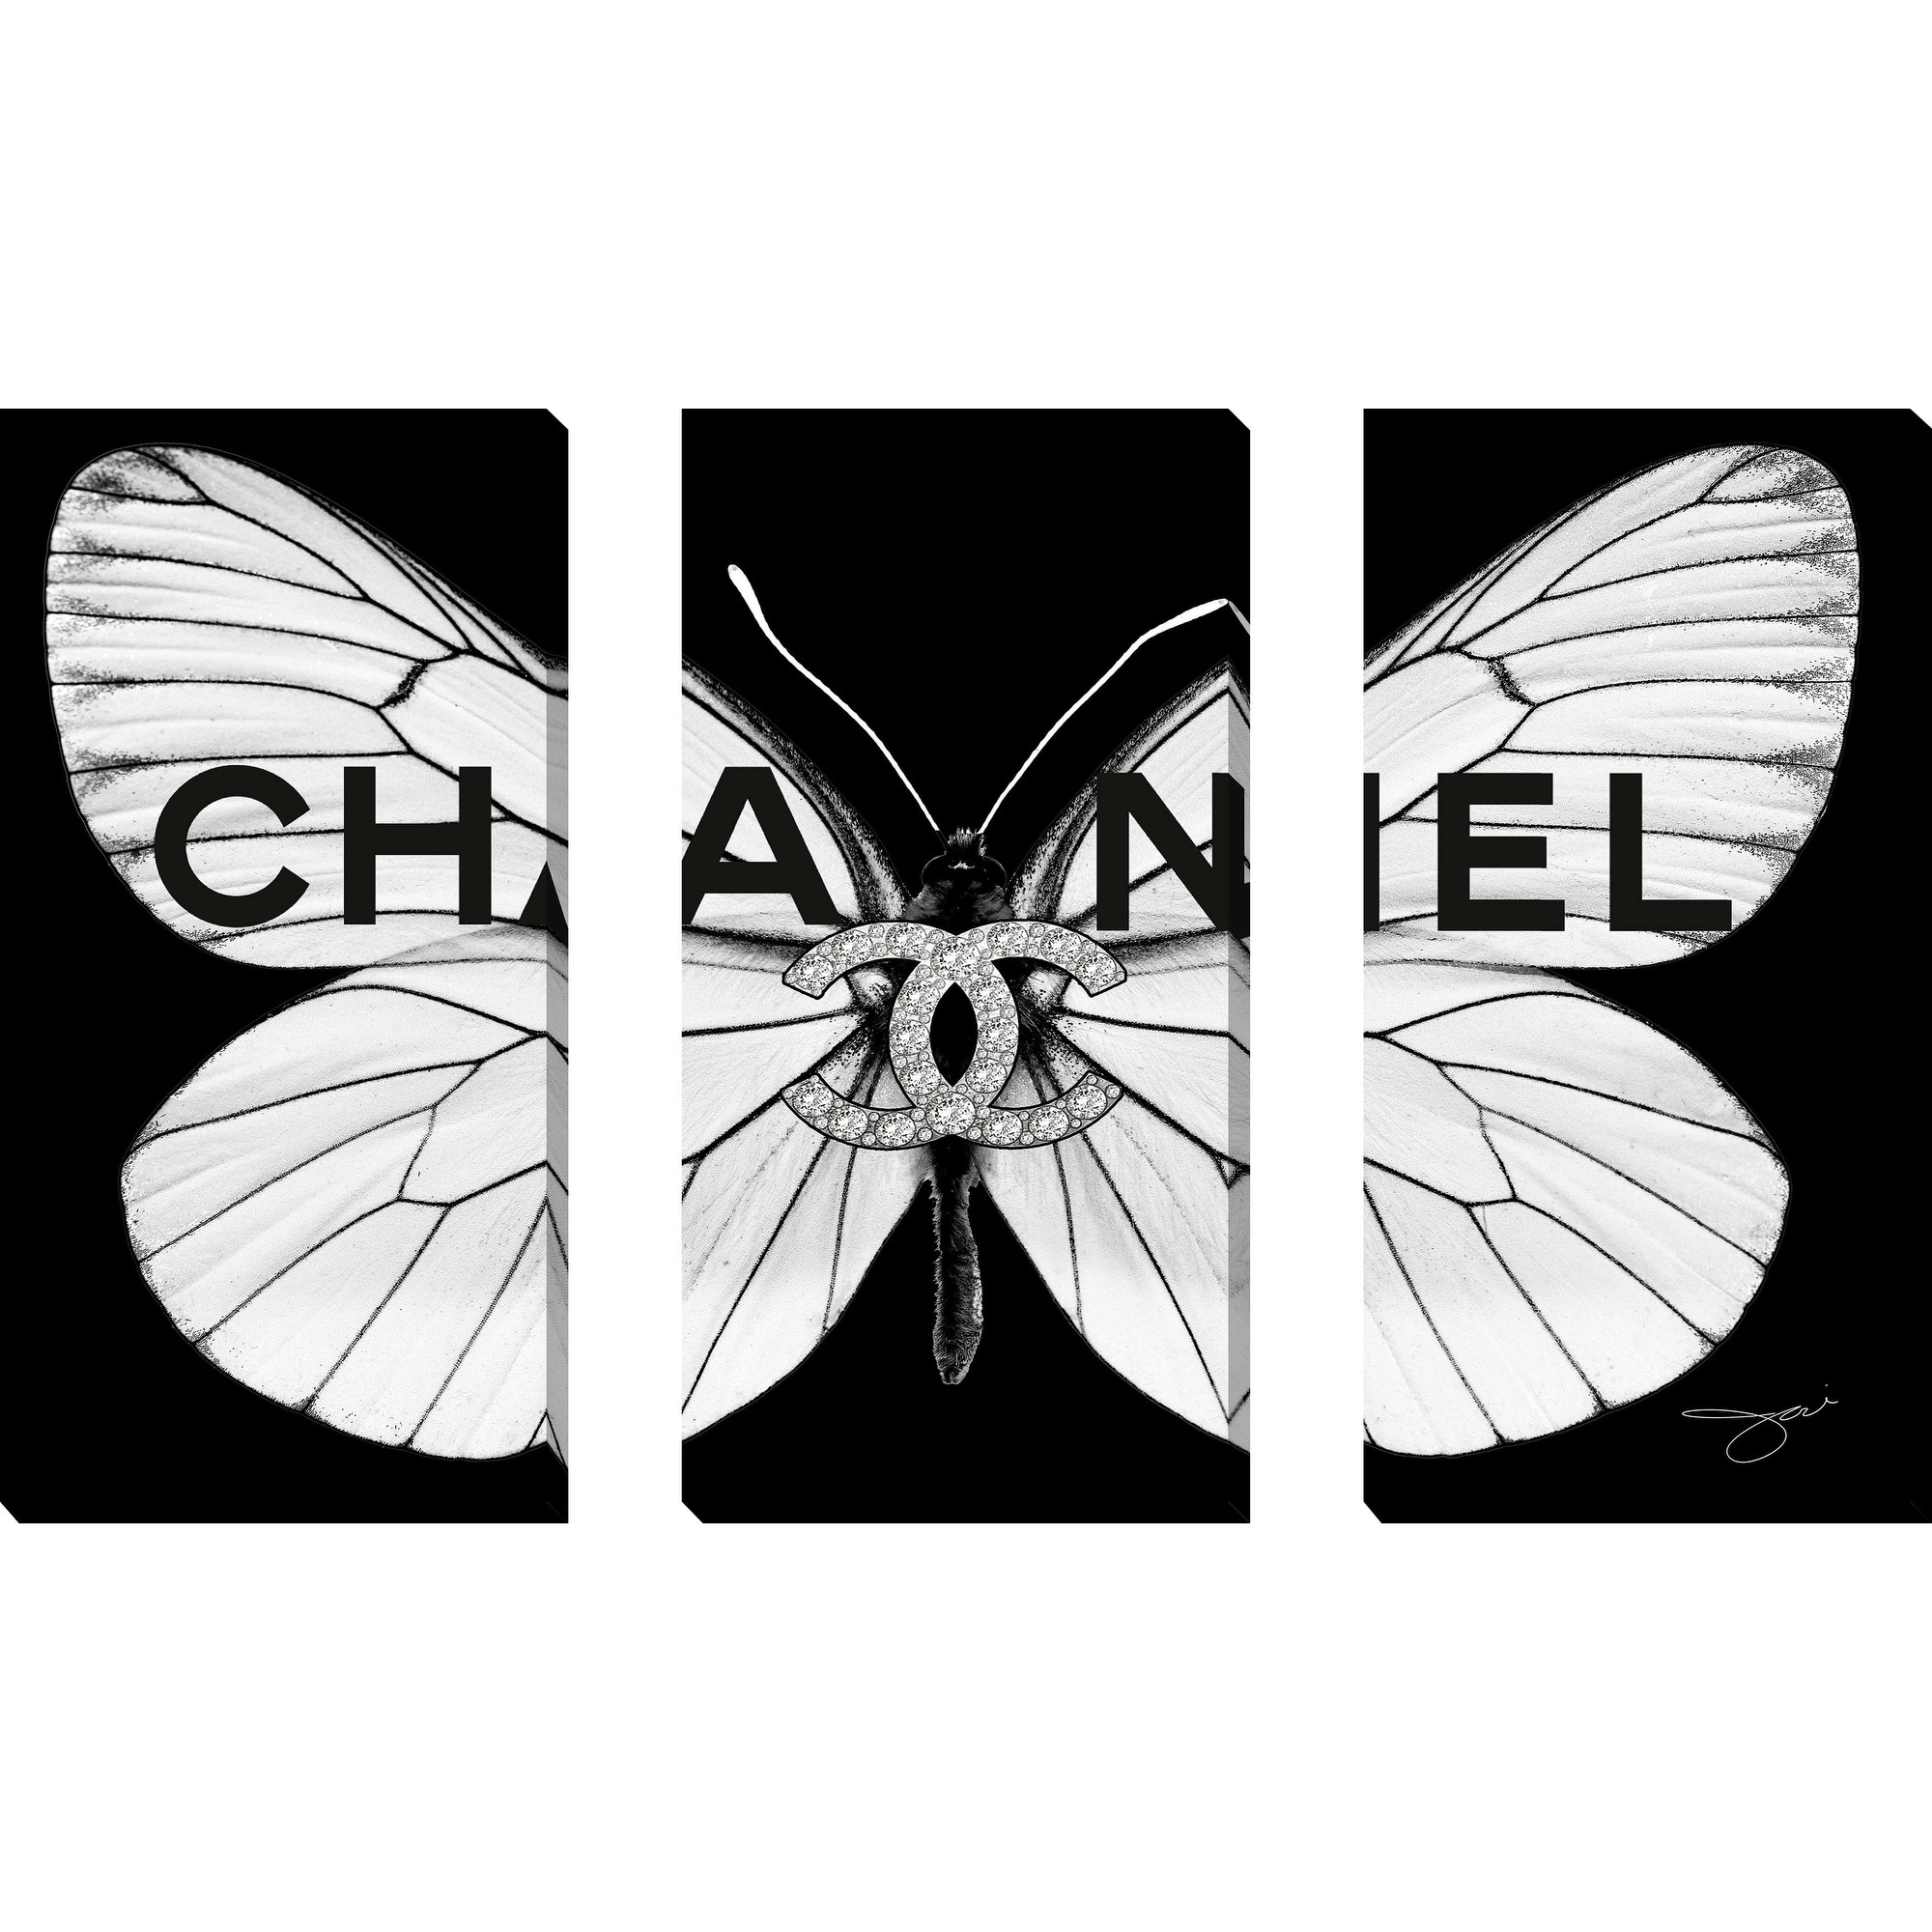 Chanel White Butterfly by Jodi 3 Piece Set on Canvas - Bed Bath & Beyond -  36619695